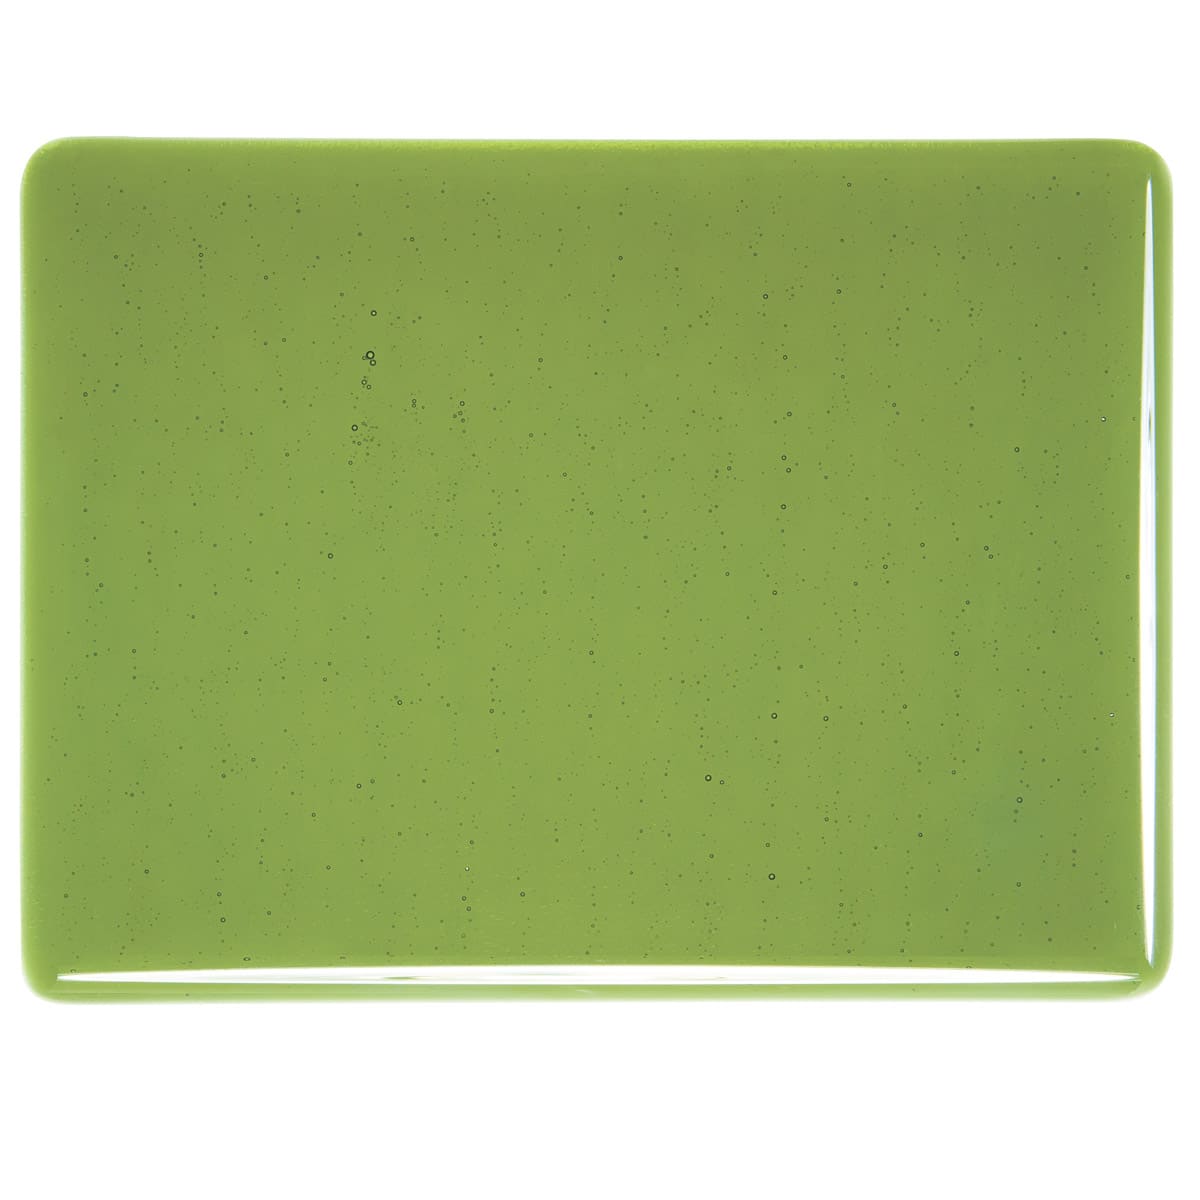 001141 Transparent Olive Green sheet glass swatch